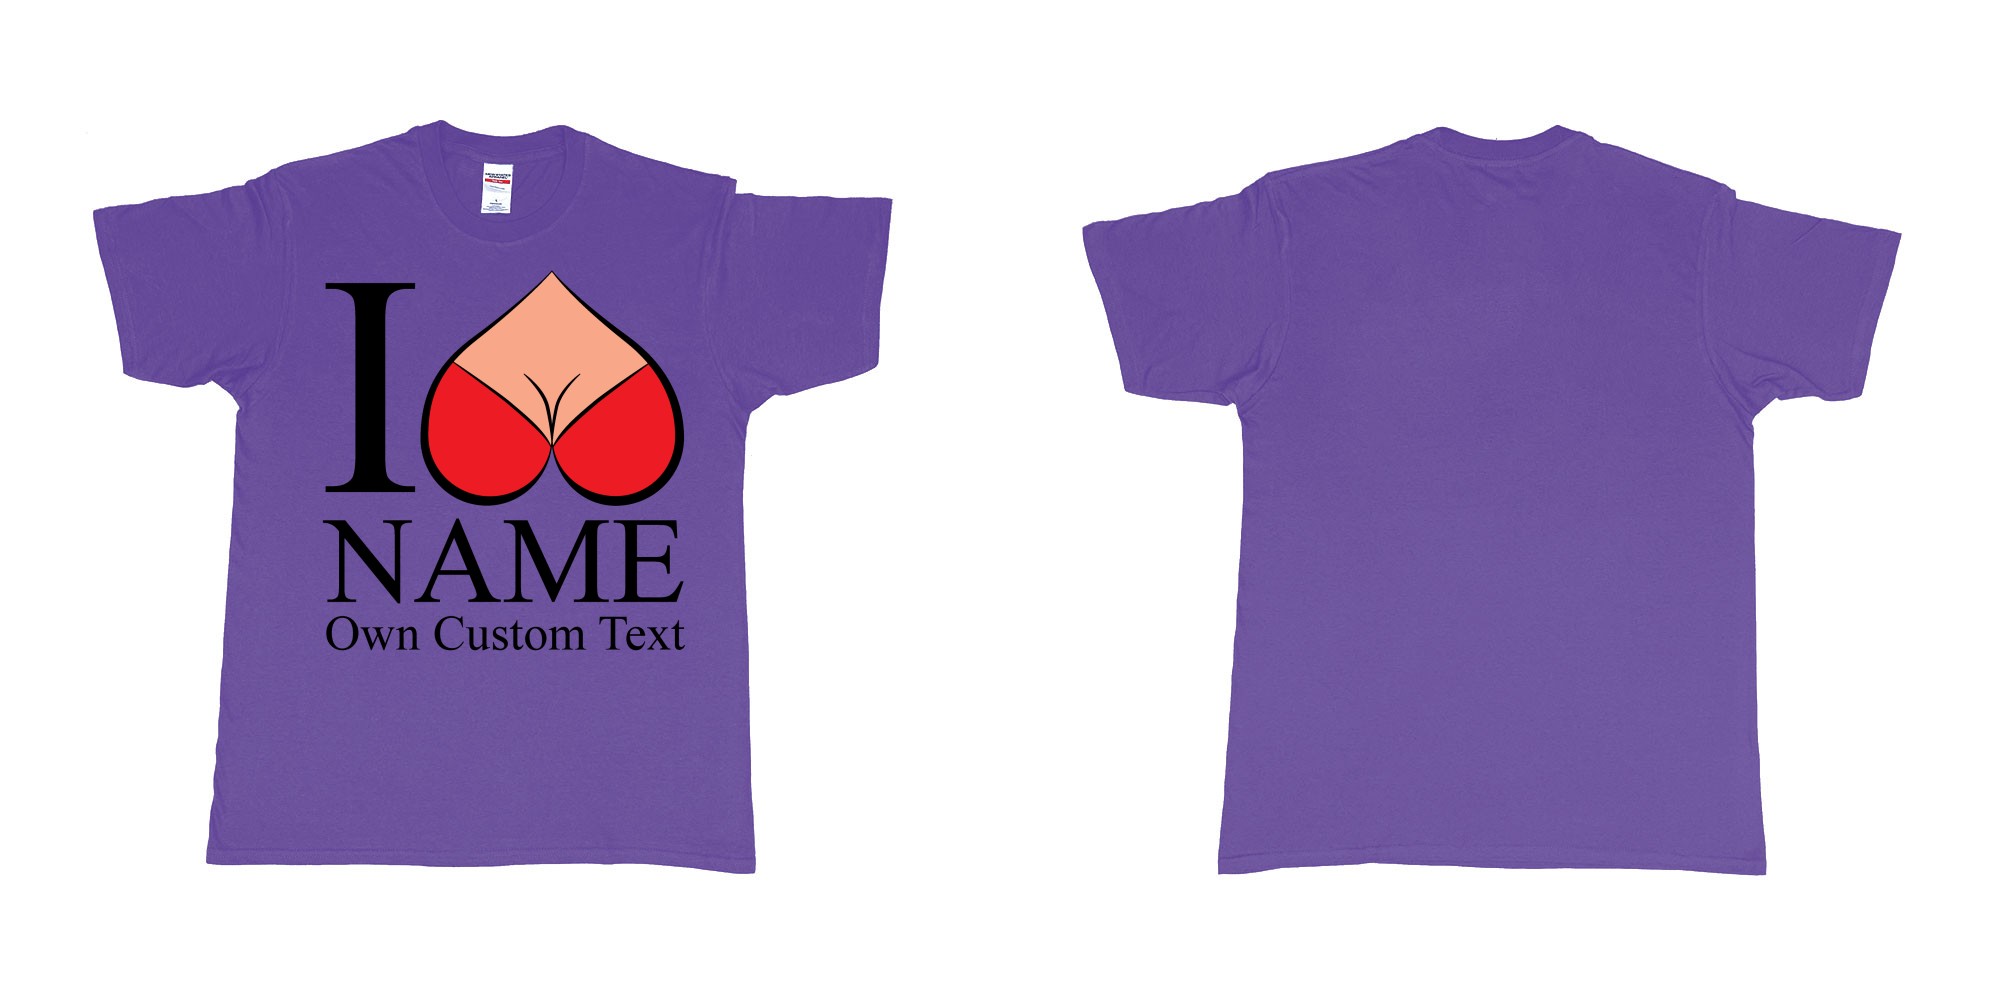 Custom tshirt design i reversed heart boobs custom text design print in fabric color purple choice your own text made in Bali by The Pirate Way